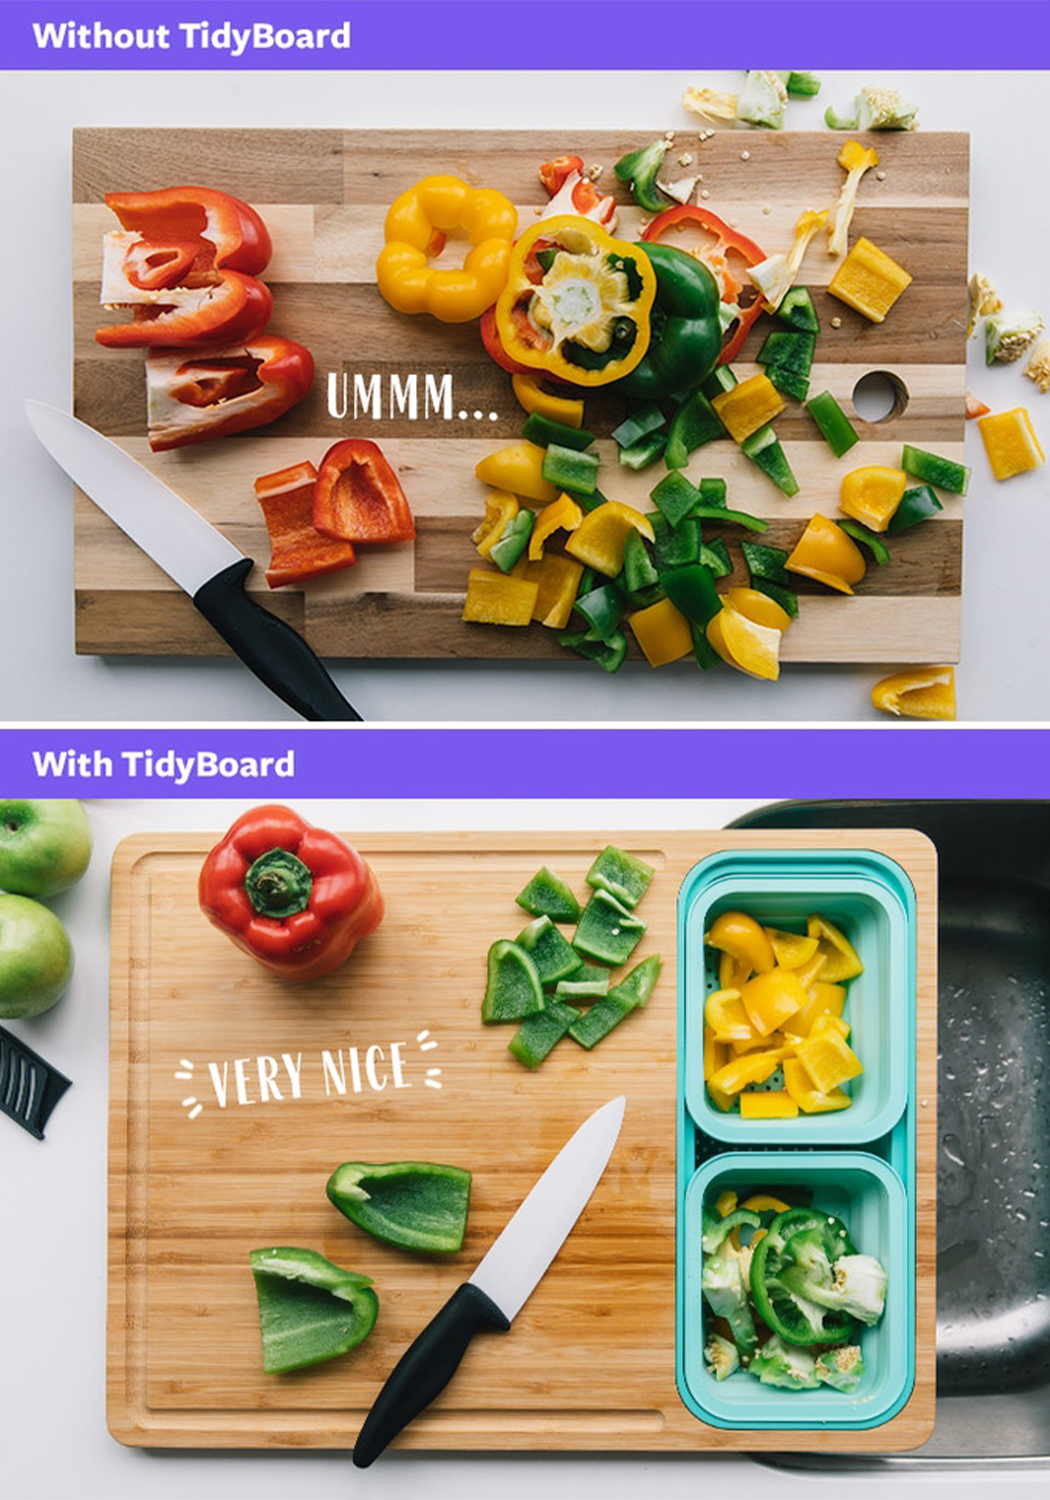 Smart chopping board with a built-in calorie counter and kitchen timer  makes healthy meal prep easy - Yanko Design